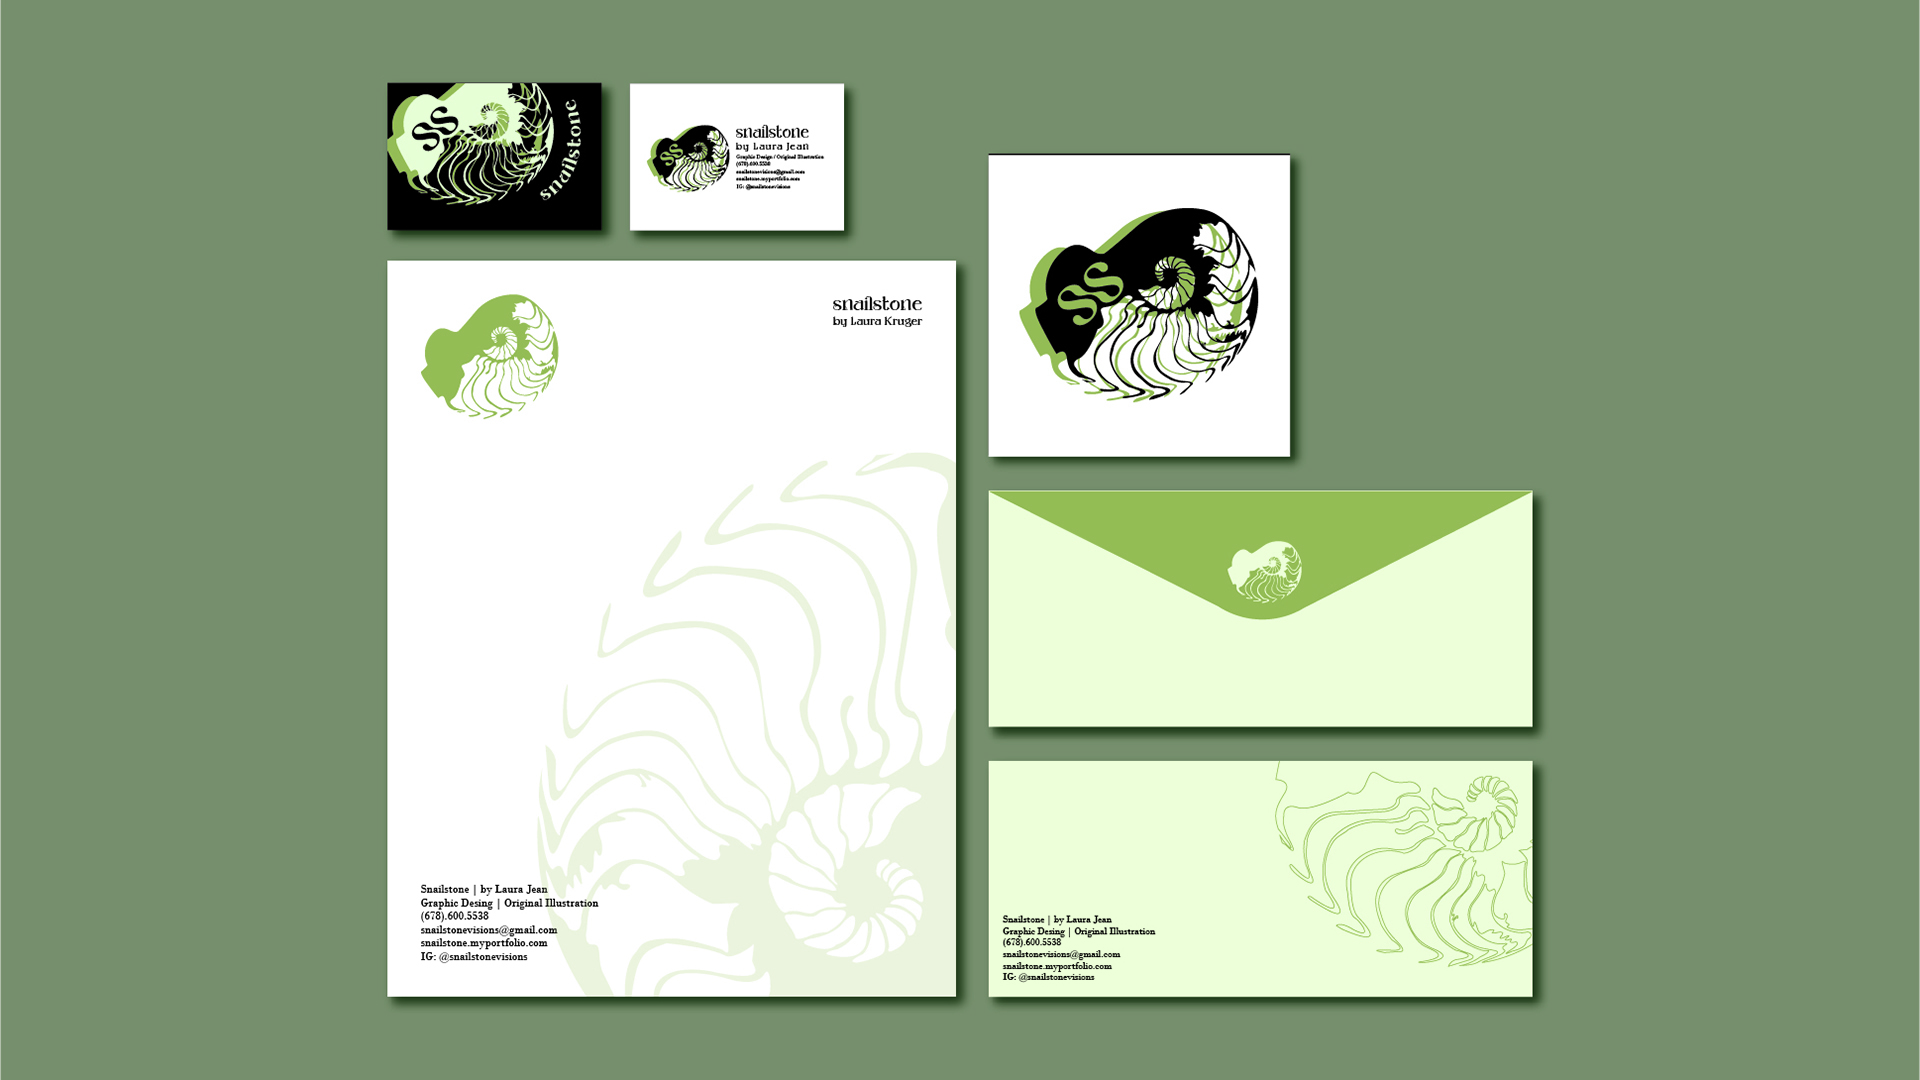 “Self Marketing Collateral” / “Self Marketing Collateral,” printed stationery for Snailstone brand, 8.5 x 11, 4.125 x 9.5, 3.5 x 2 inches, printed letterhead, envelope, and business card, 2023. This stationary is for communication and advertising between myself and clients.